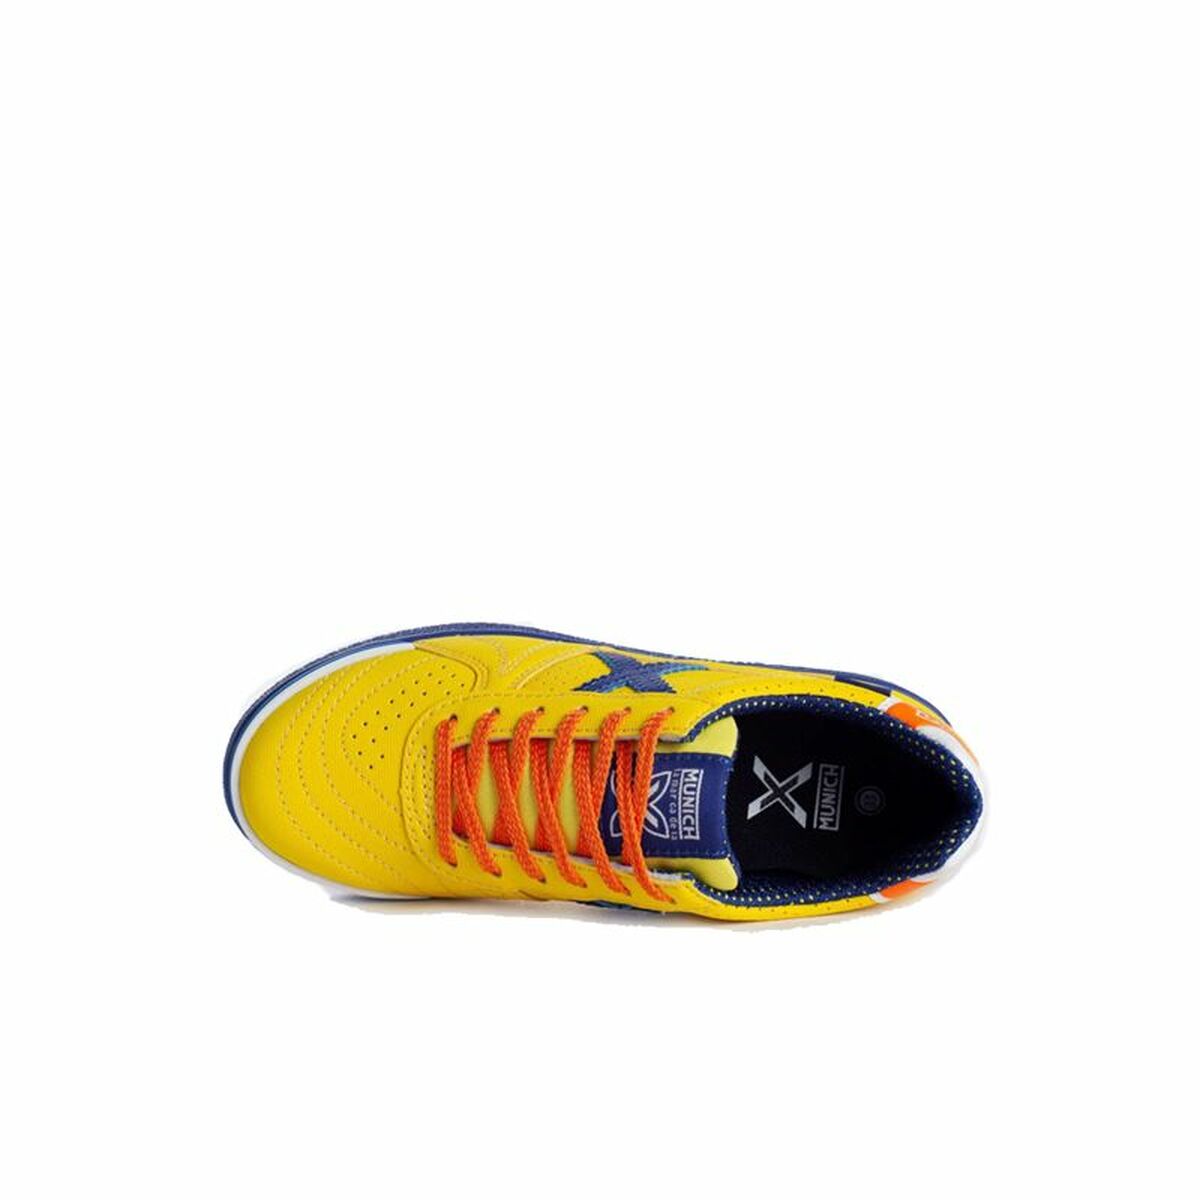 Indoor Football Shoes Munich G-3 Profit Yellow Adults